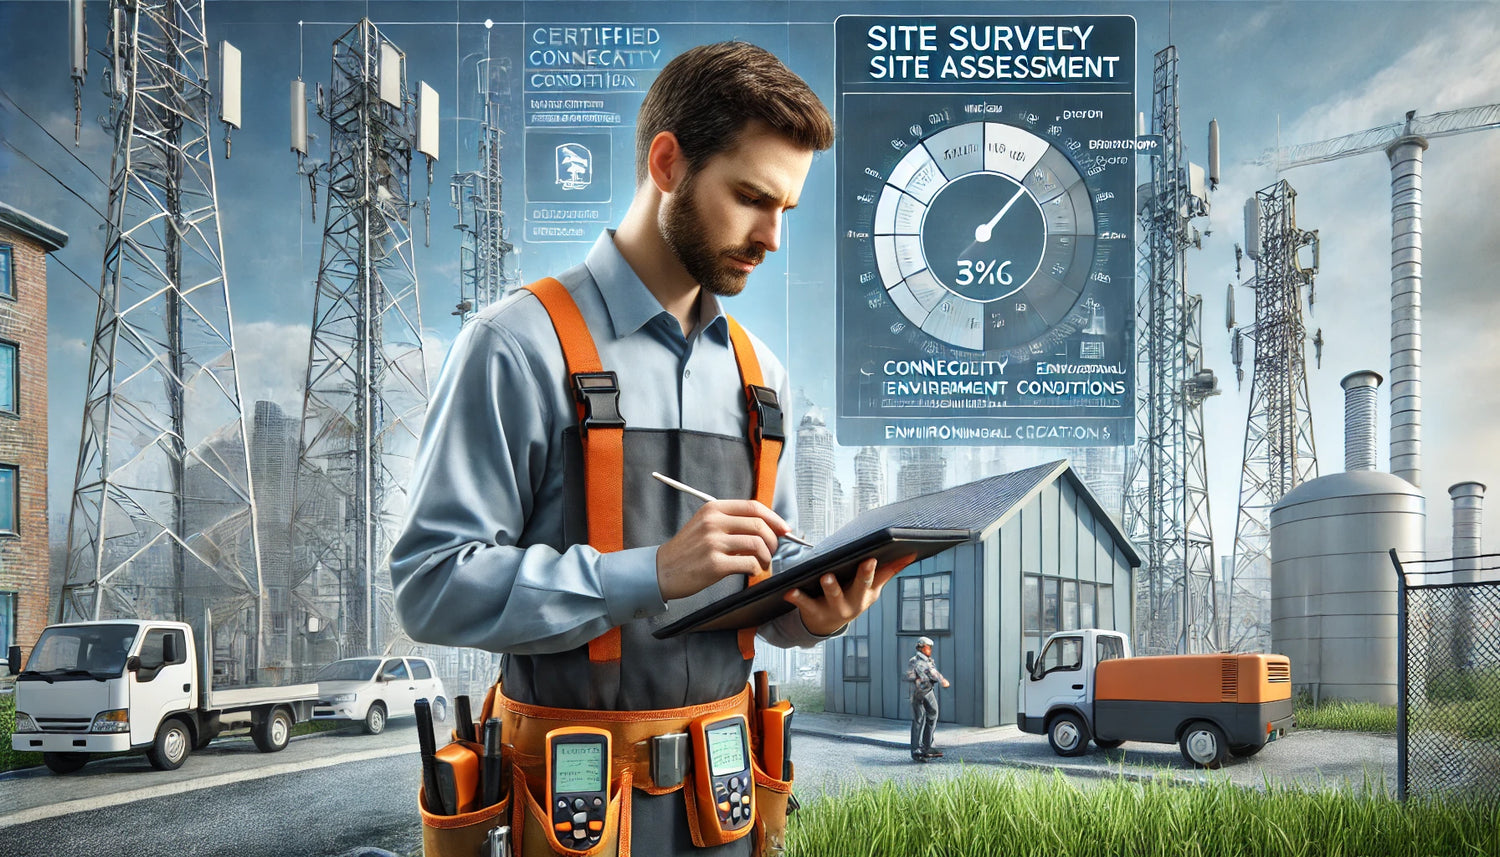 DALL_E_2024-07-01_12.17.00_-_A_realistic_image_of_a_certified_technician_conducting_a_site_survey_and_assessment._The_technician_is_seen_evaluating_connectivity